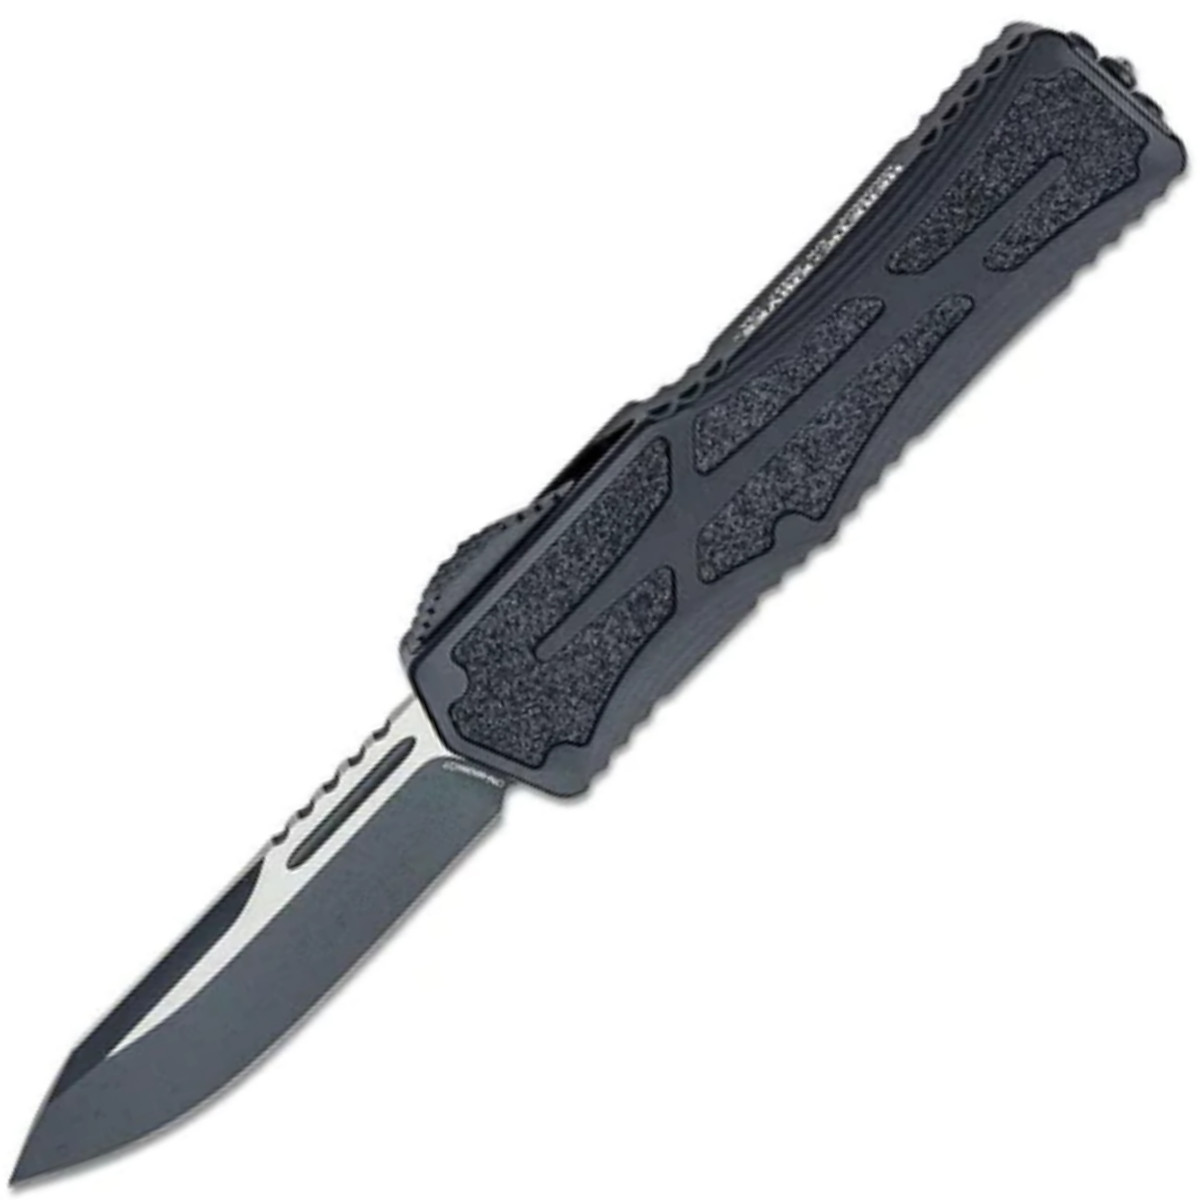 Heretic-Knives-Colossus-Two-Tone-Tactical-H039-10A-T